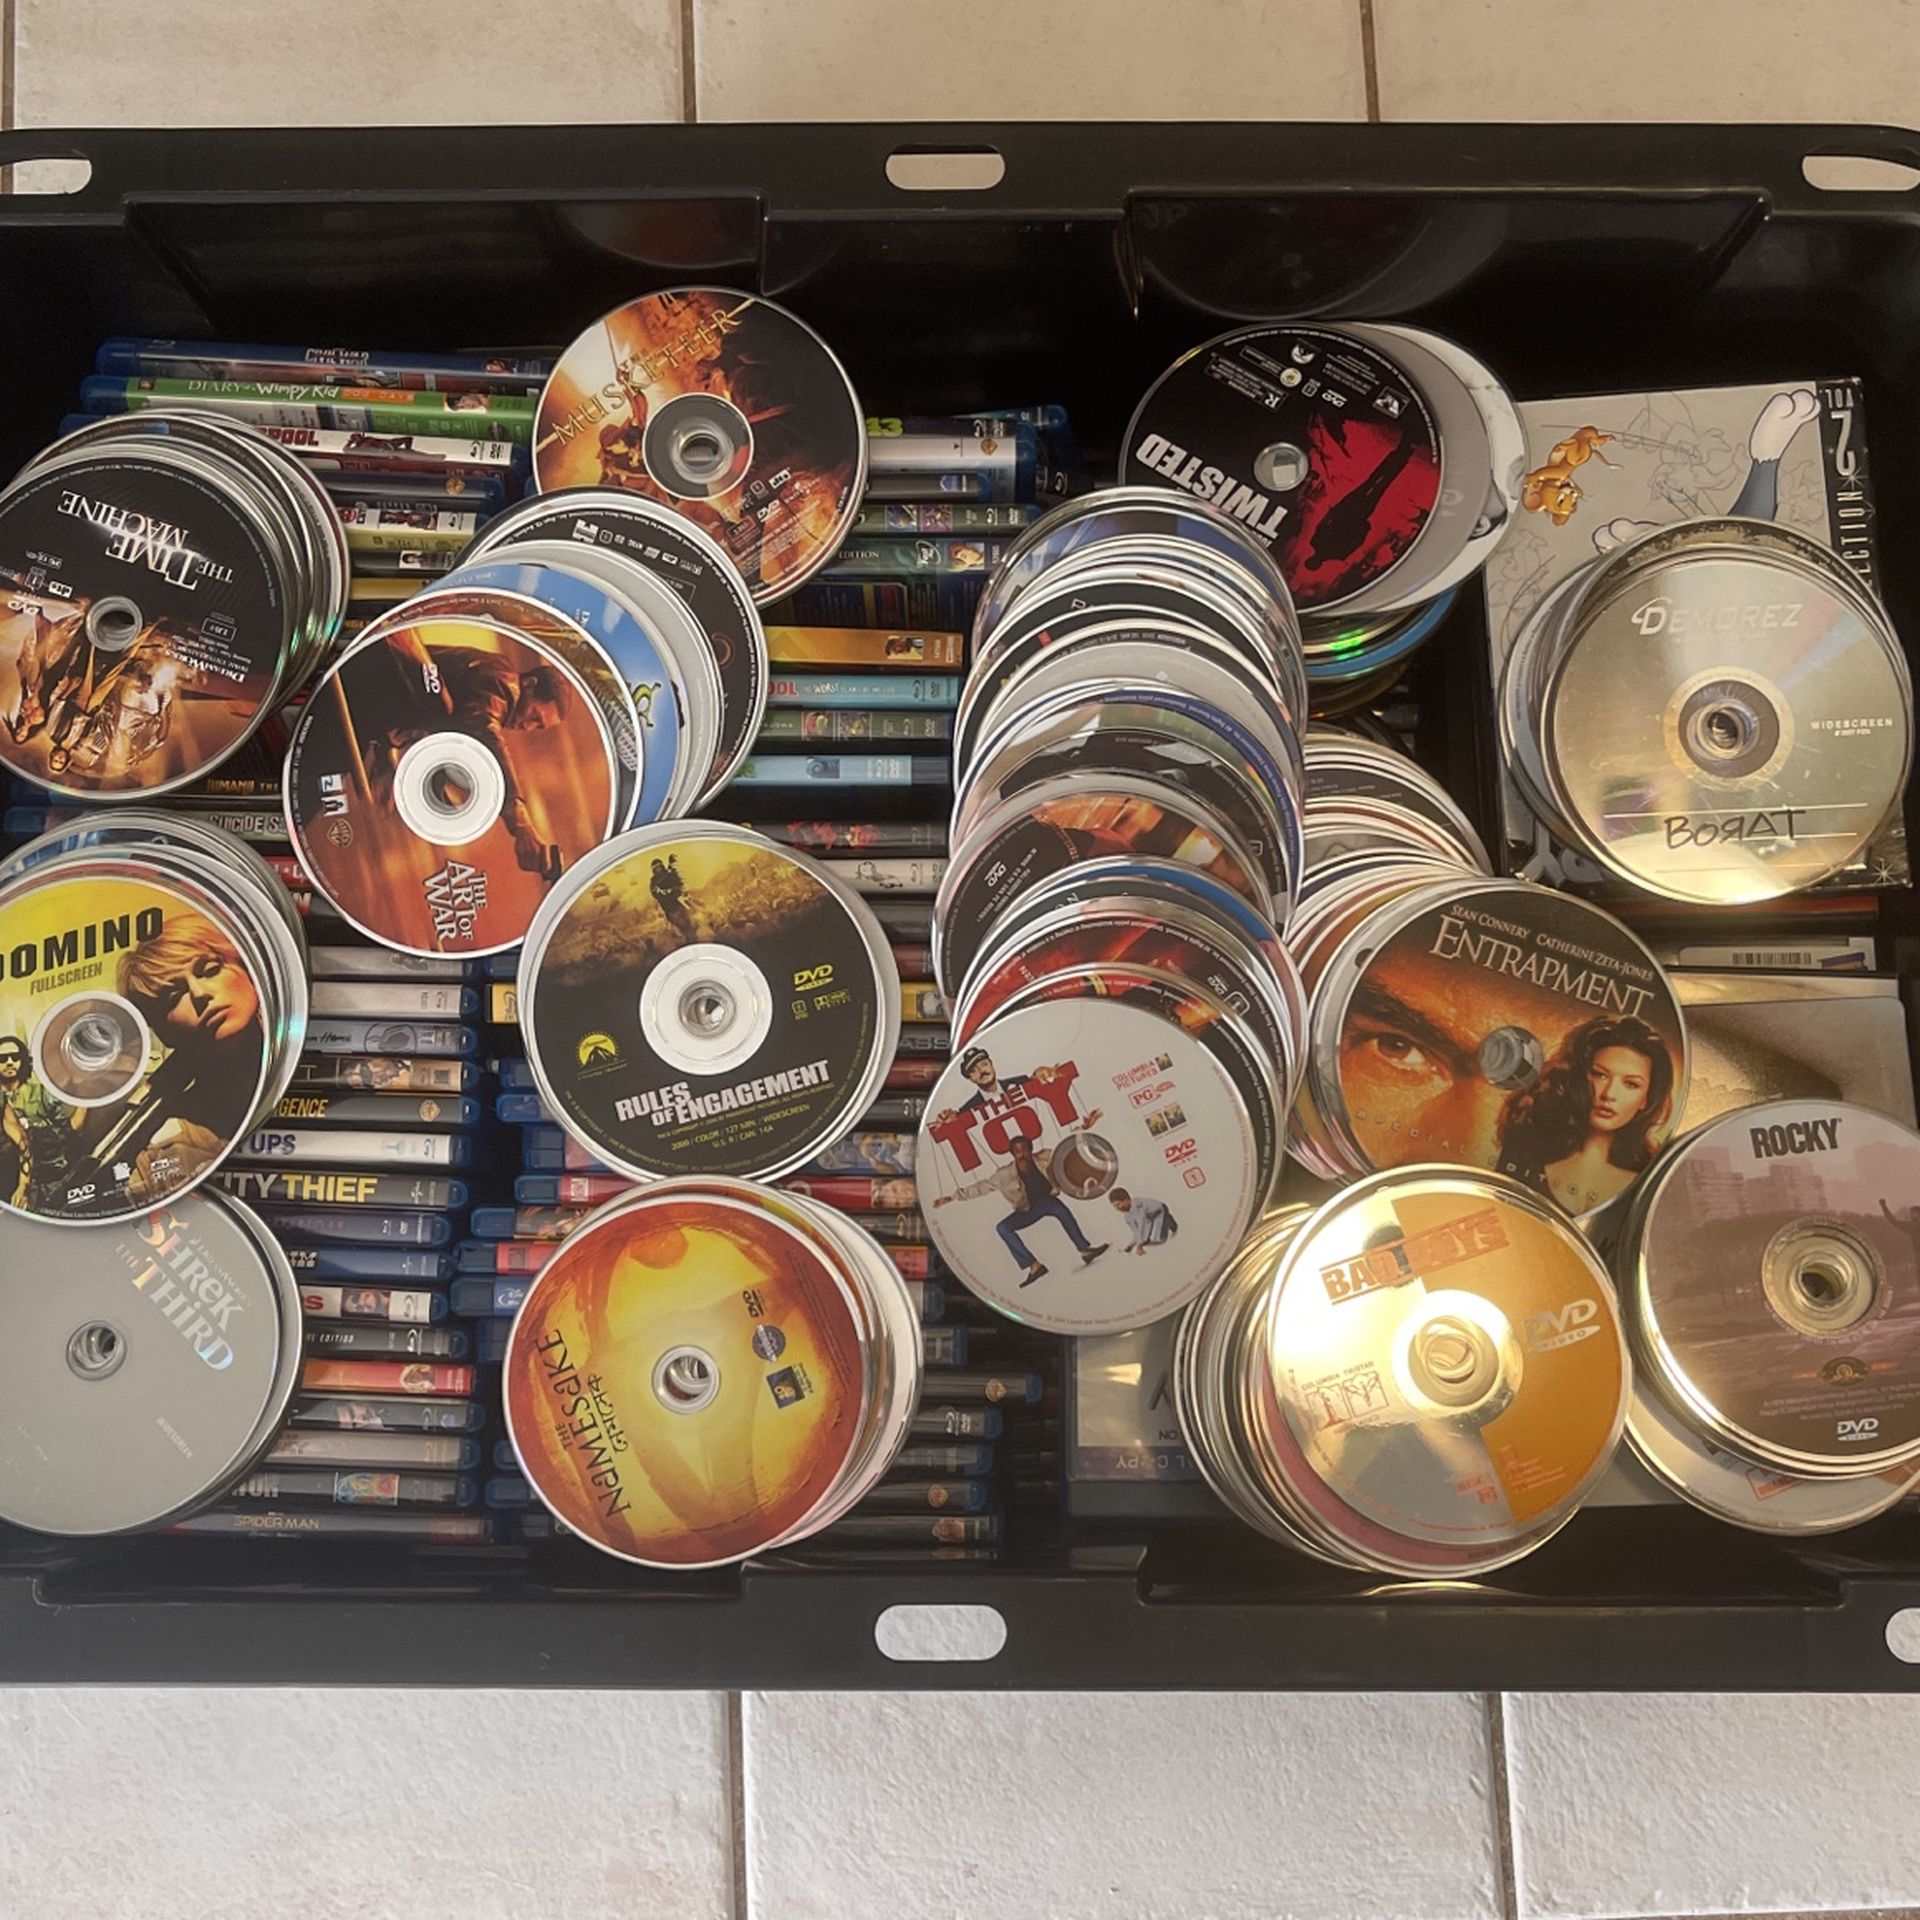 200+ Blu-ray and Regular DVDs